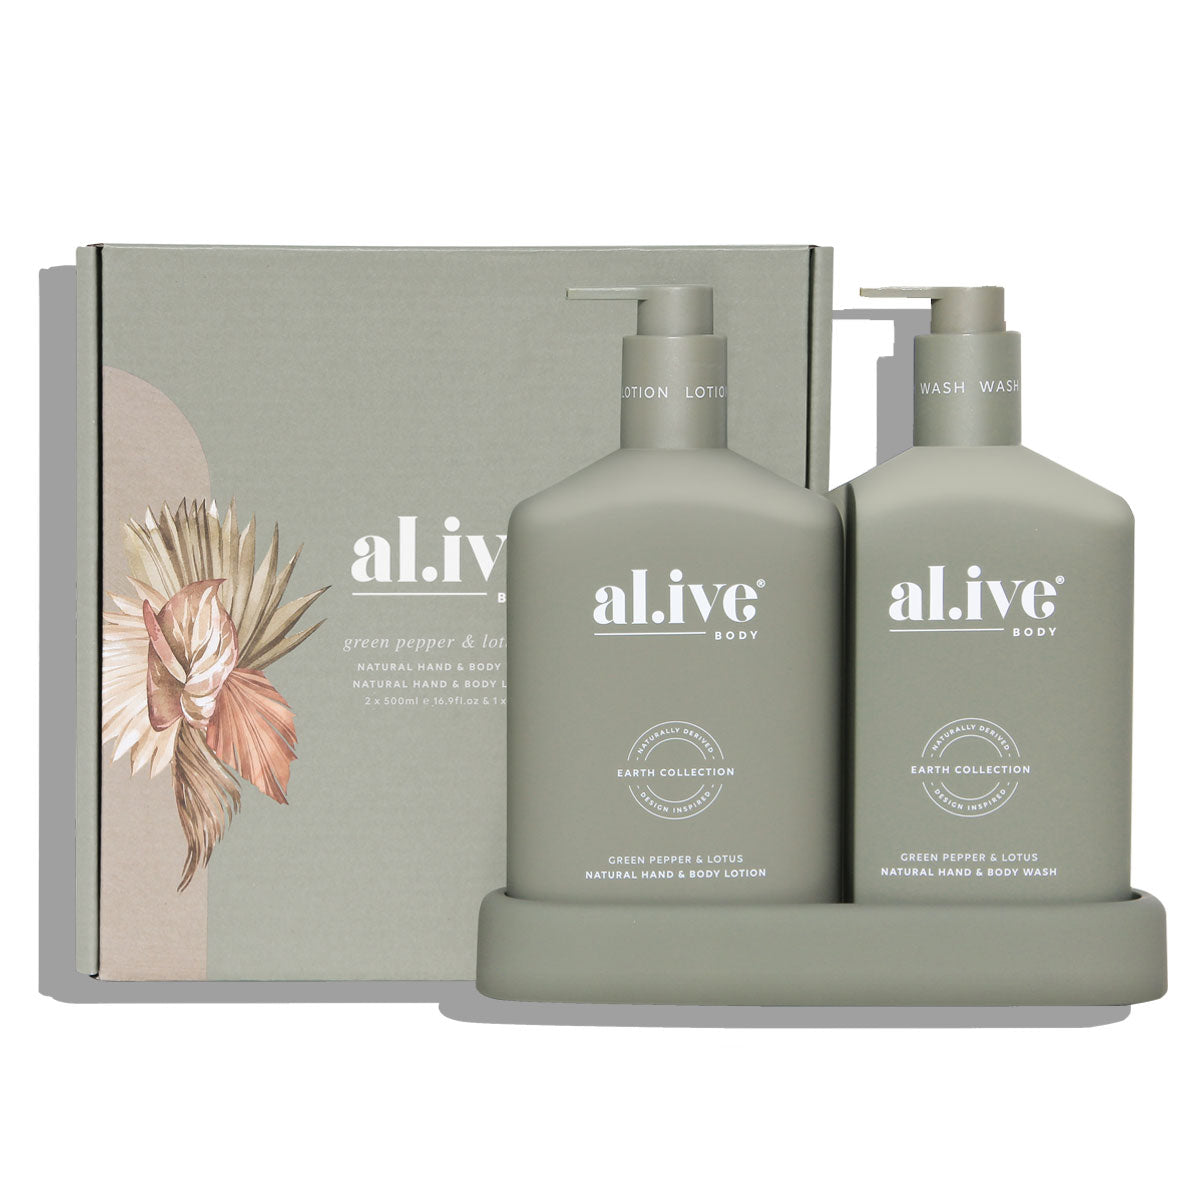    The al.ive body Green Pepper & Lotus Hand & Body Wash/Lotion Duo contains a luxurious blend of naturally derived ingredients, fortified with essential oils and native botanical extracts.  The Duo includes a 500ml hand & body wash, 500ml hand & body lotion and a matching tray.